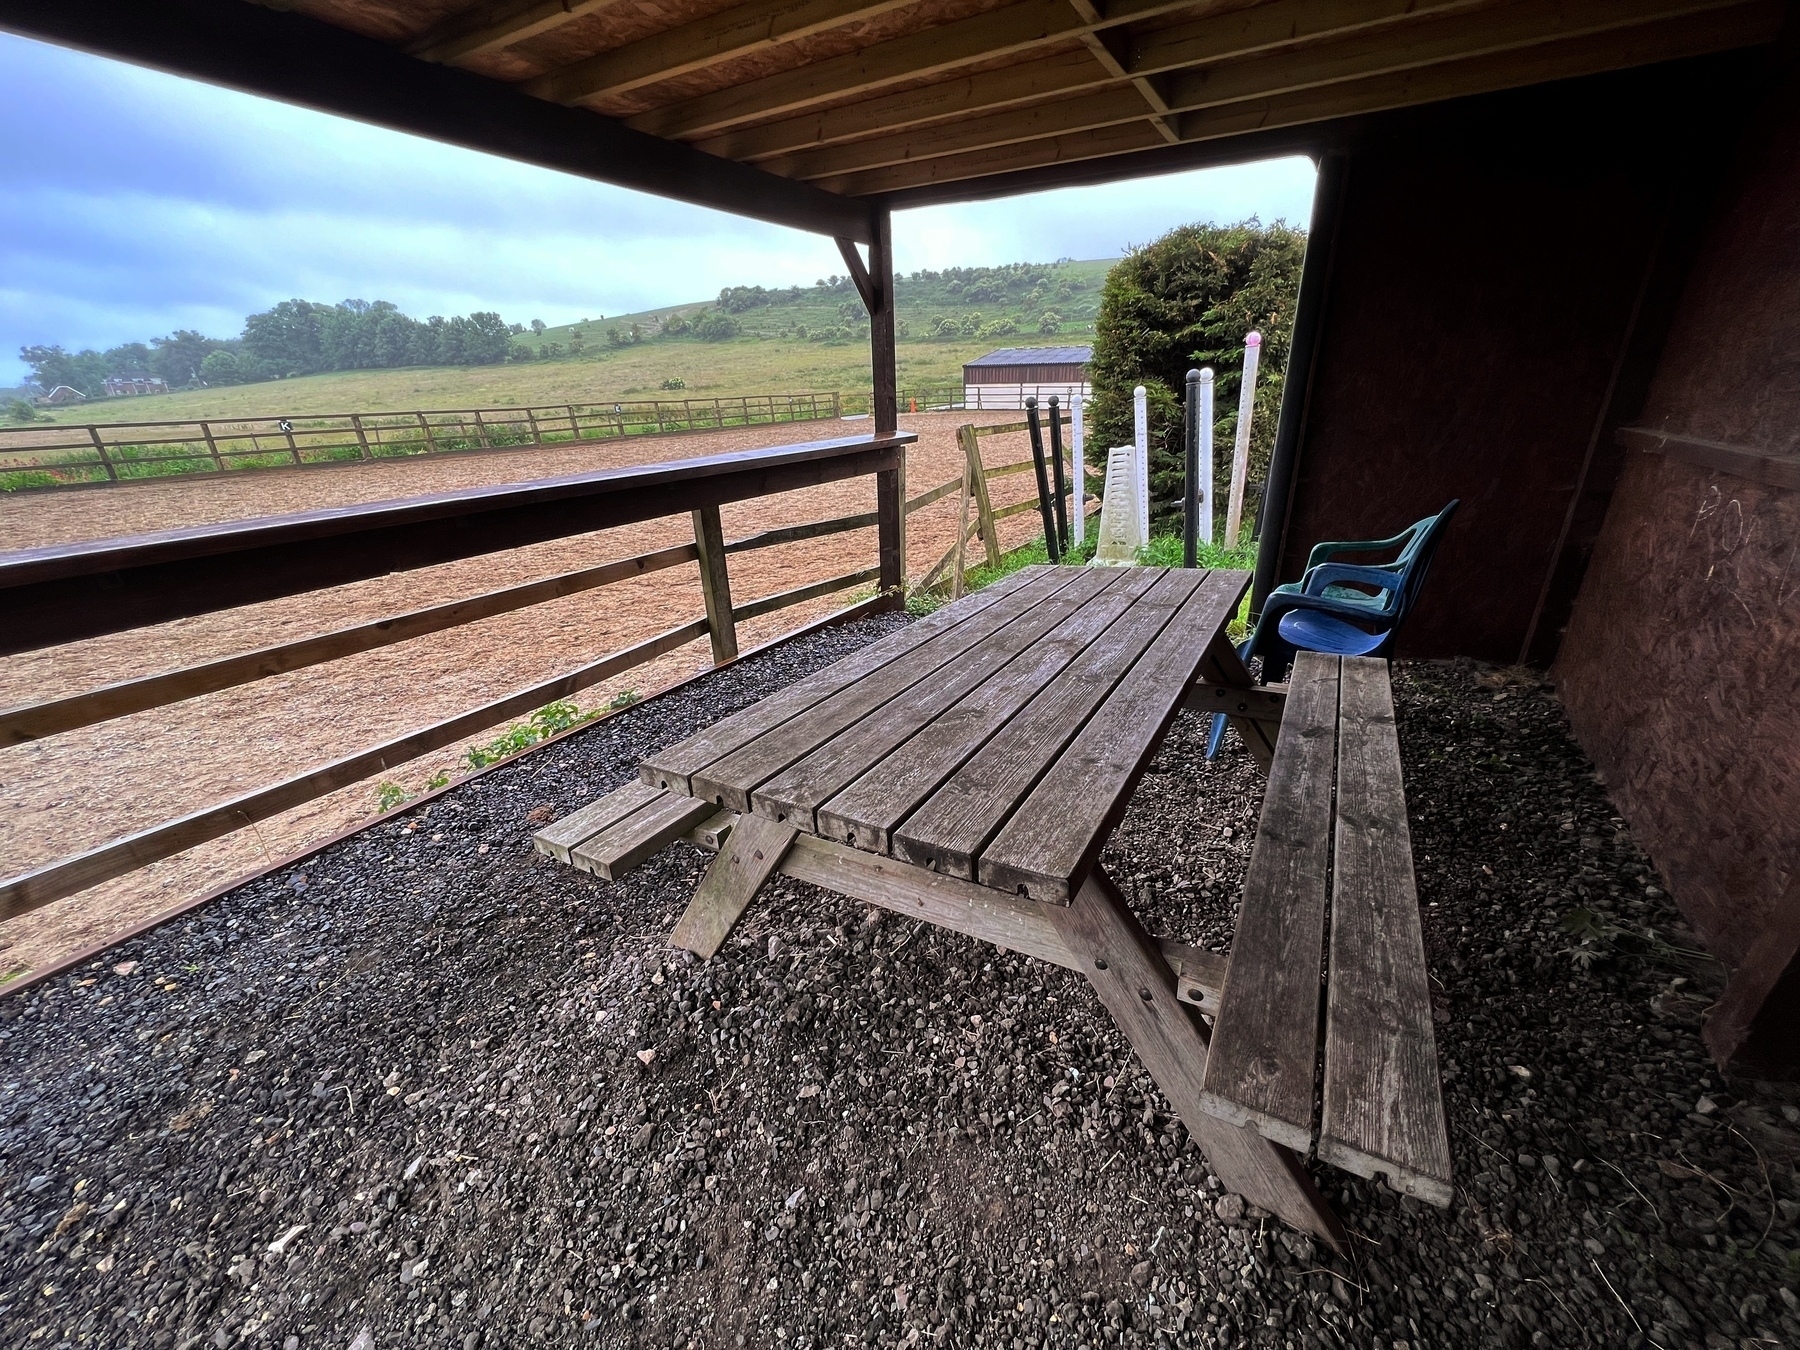 The viewing shed at Happy Valley stables.